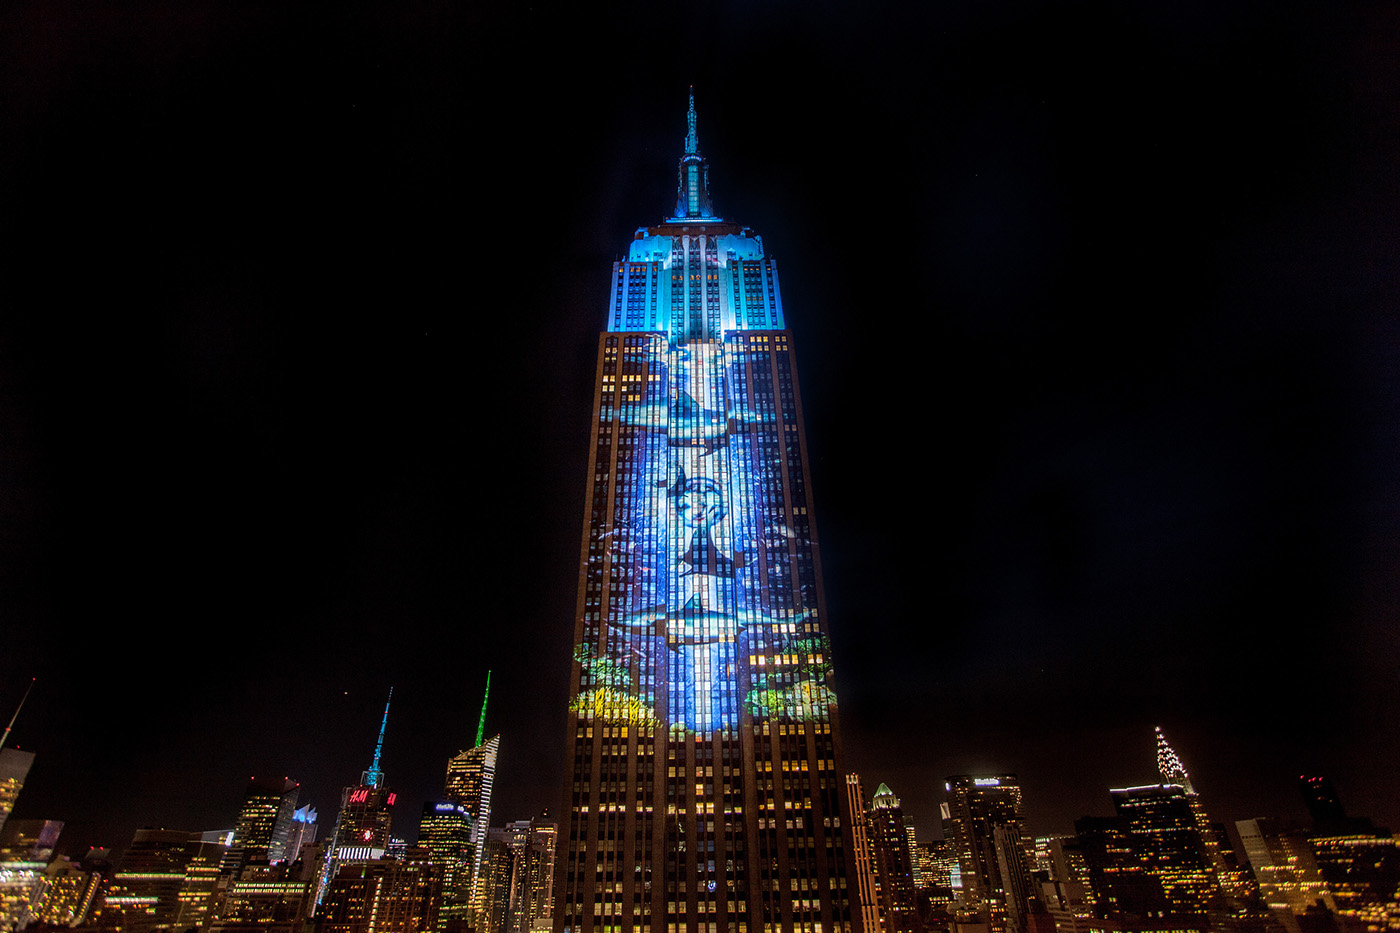 Adobe Portfolio empire state building projection projection mapping obscura OPS Racing Extinction New York ESB Empire climate change Mapping